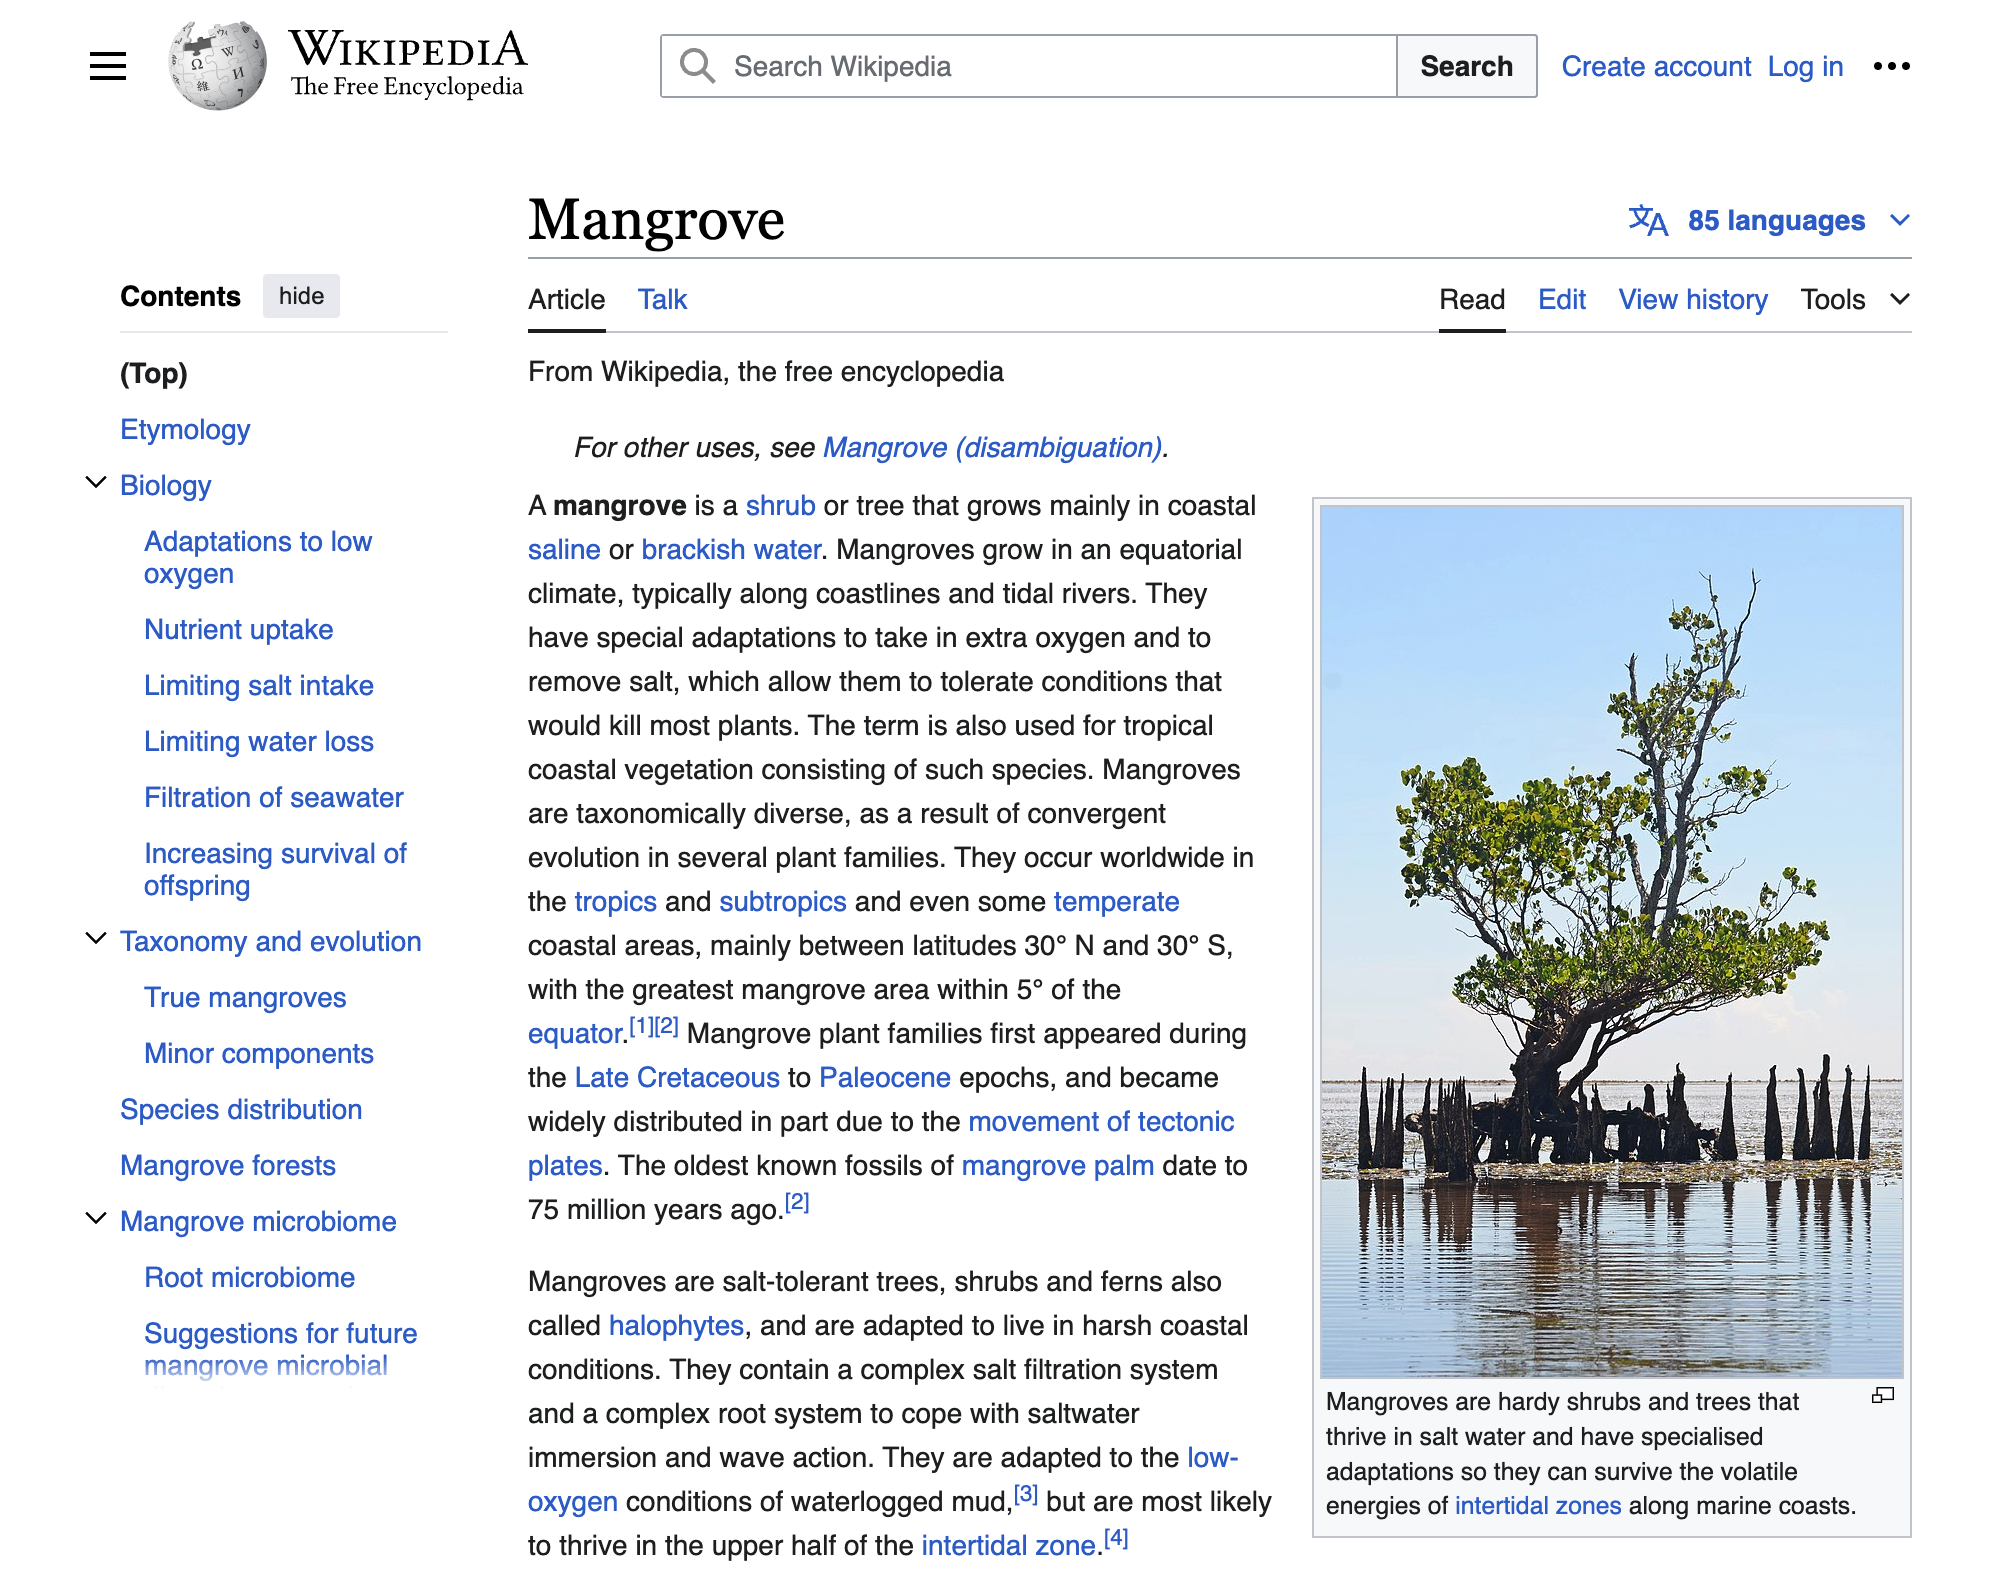 The Wikipedia article on mangroves.